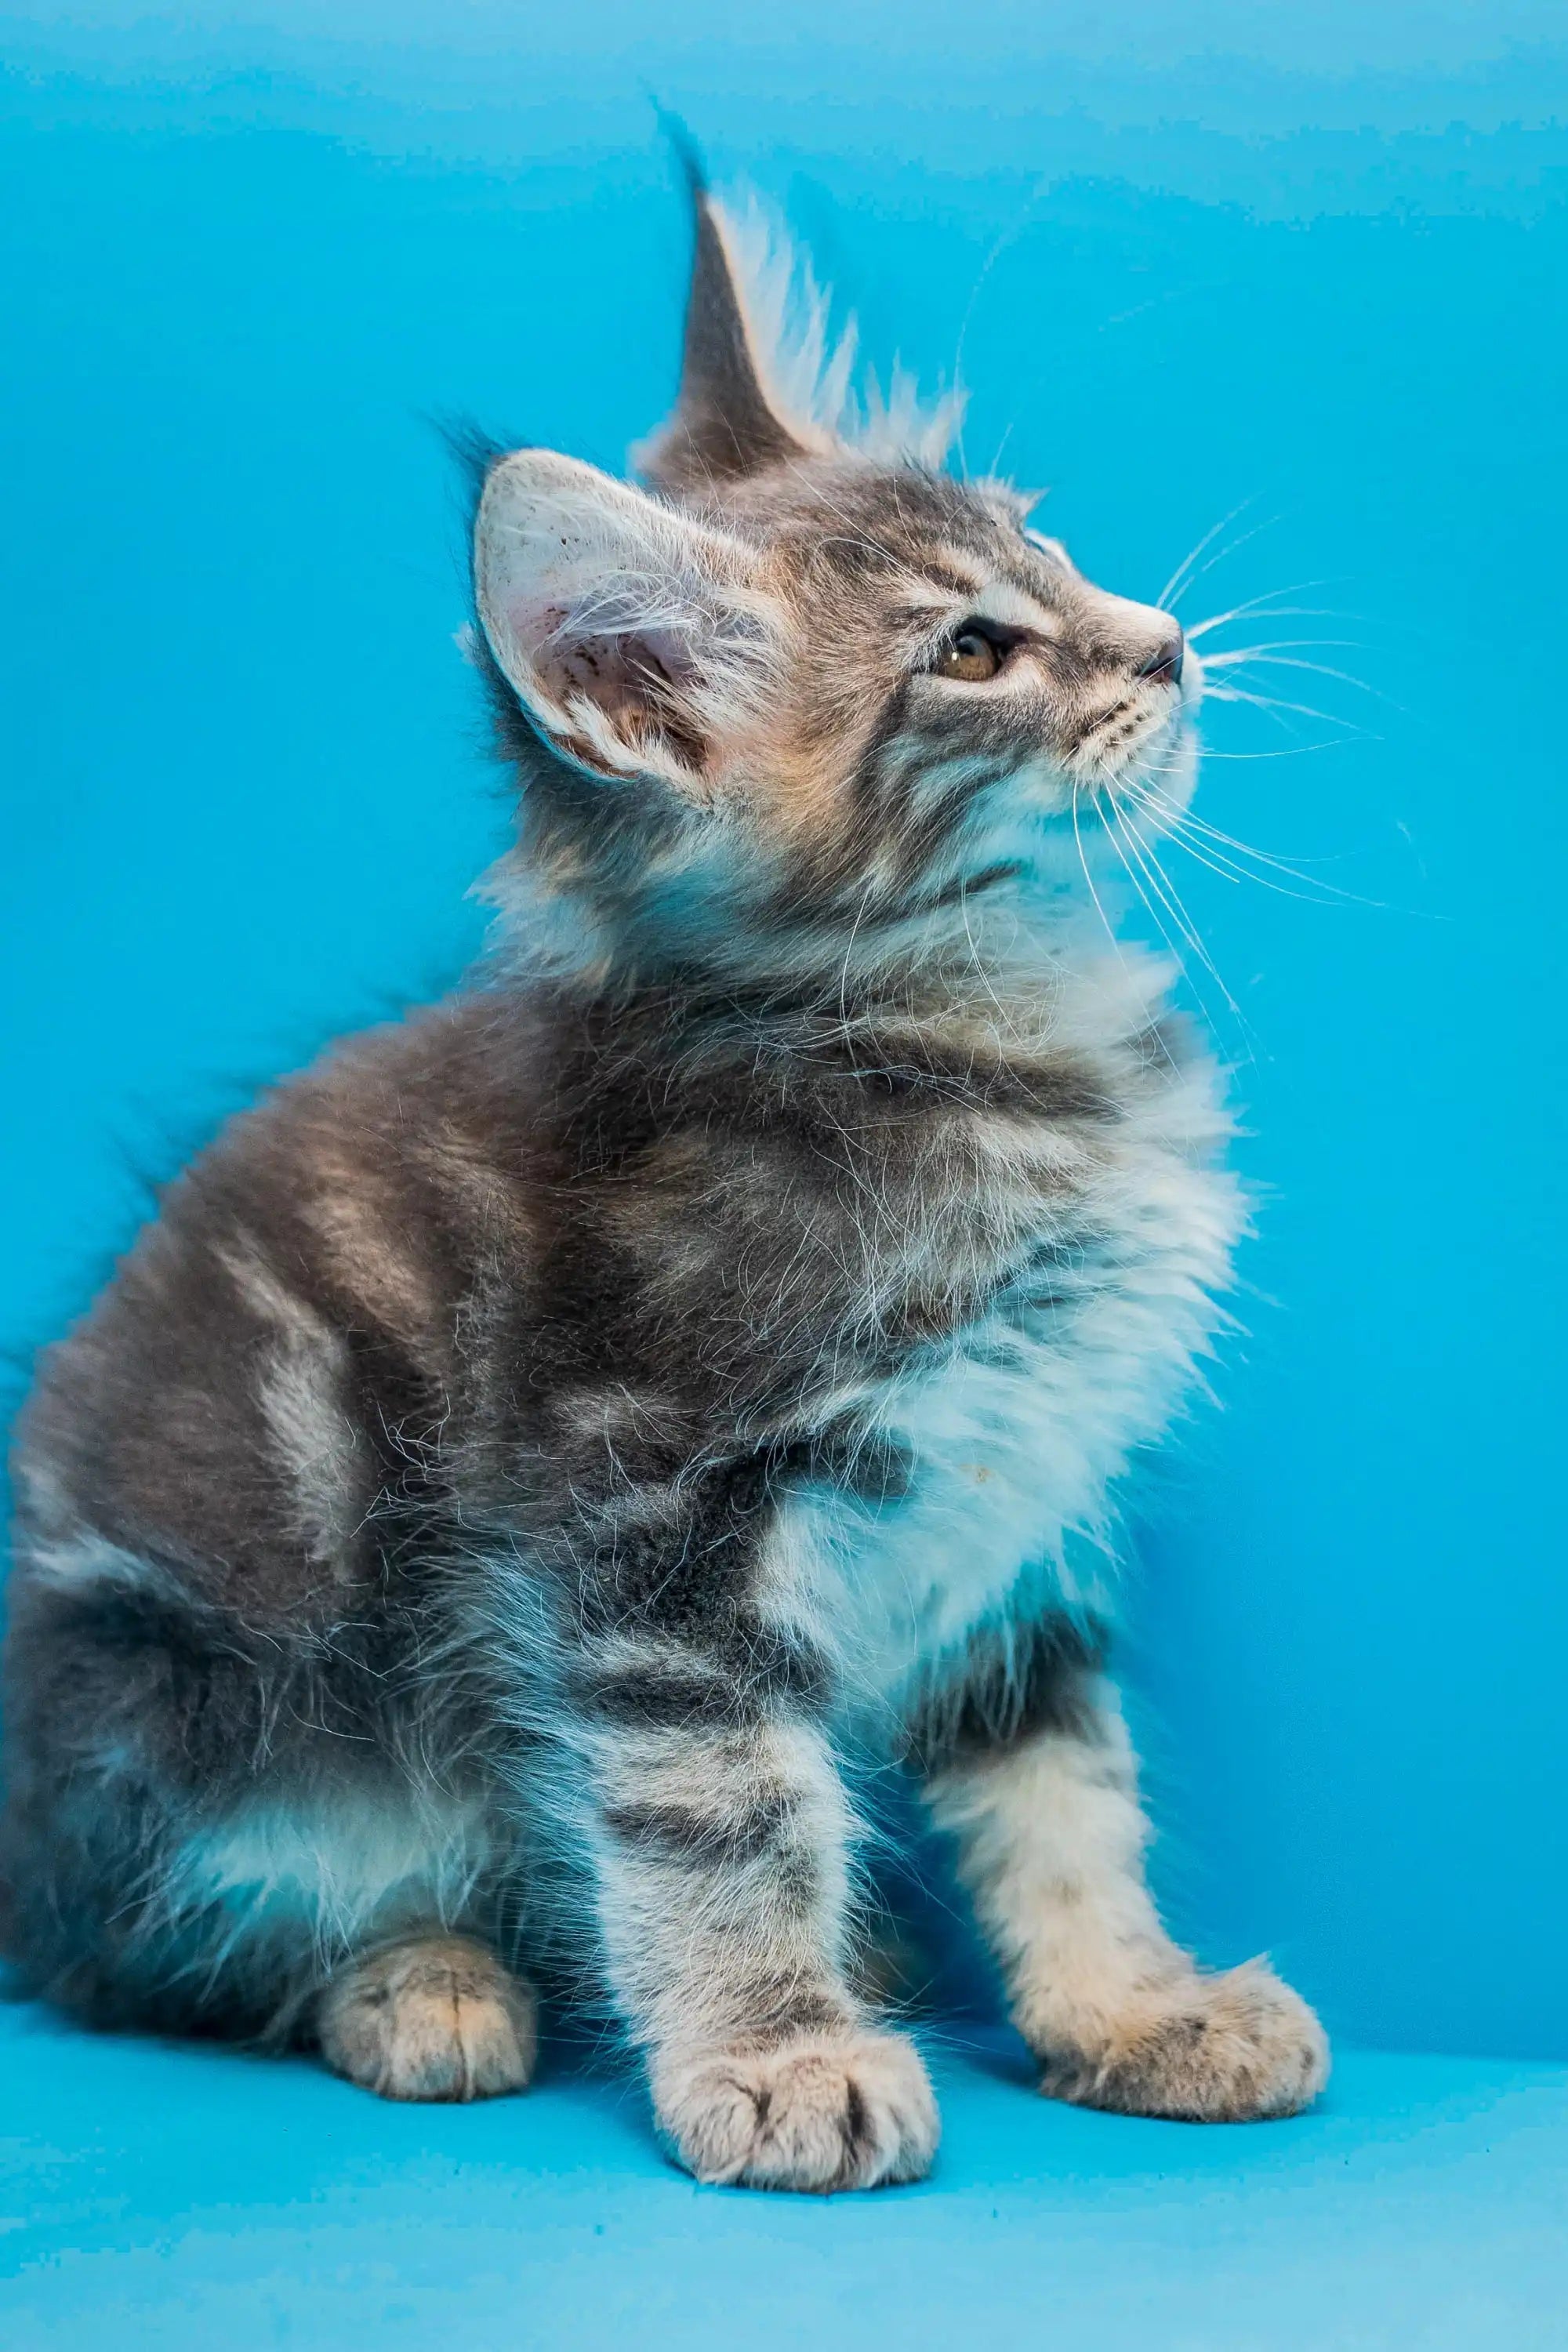 Maine Coon Kittens for Sale Adonis | Kitten